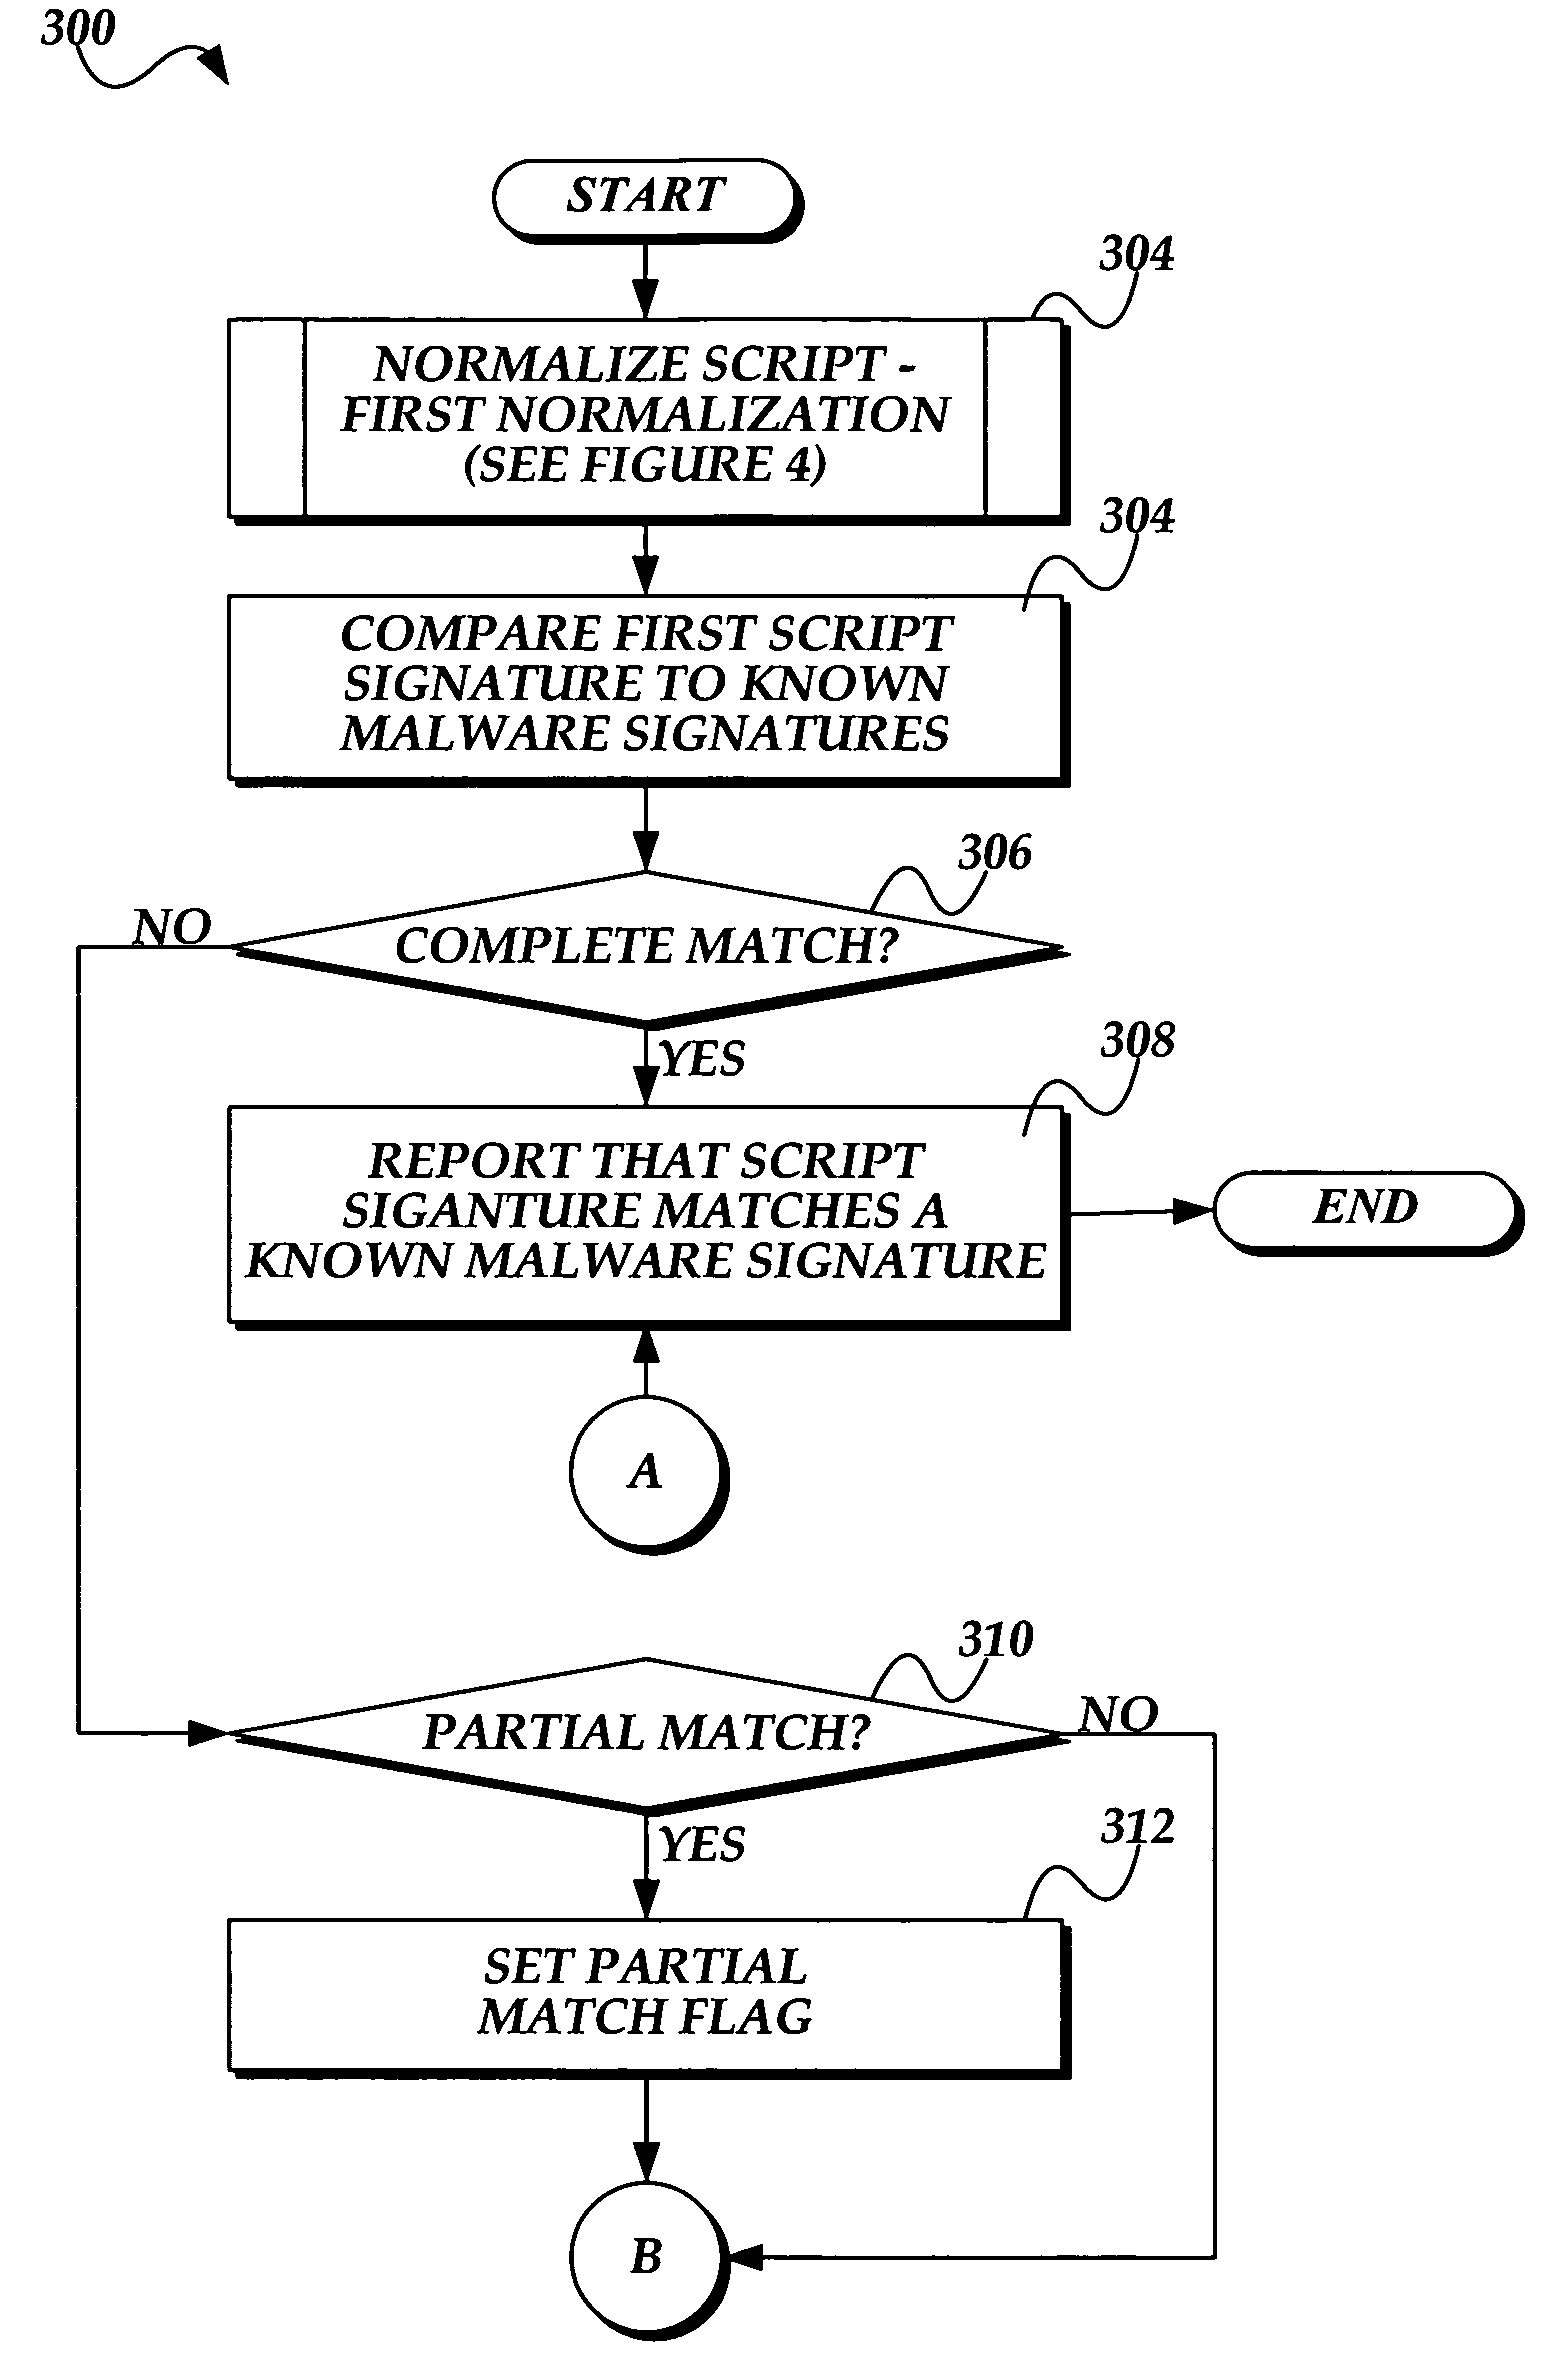 System and method for detecting malware in executable scripts according to its functionality